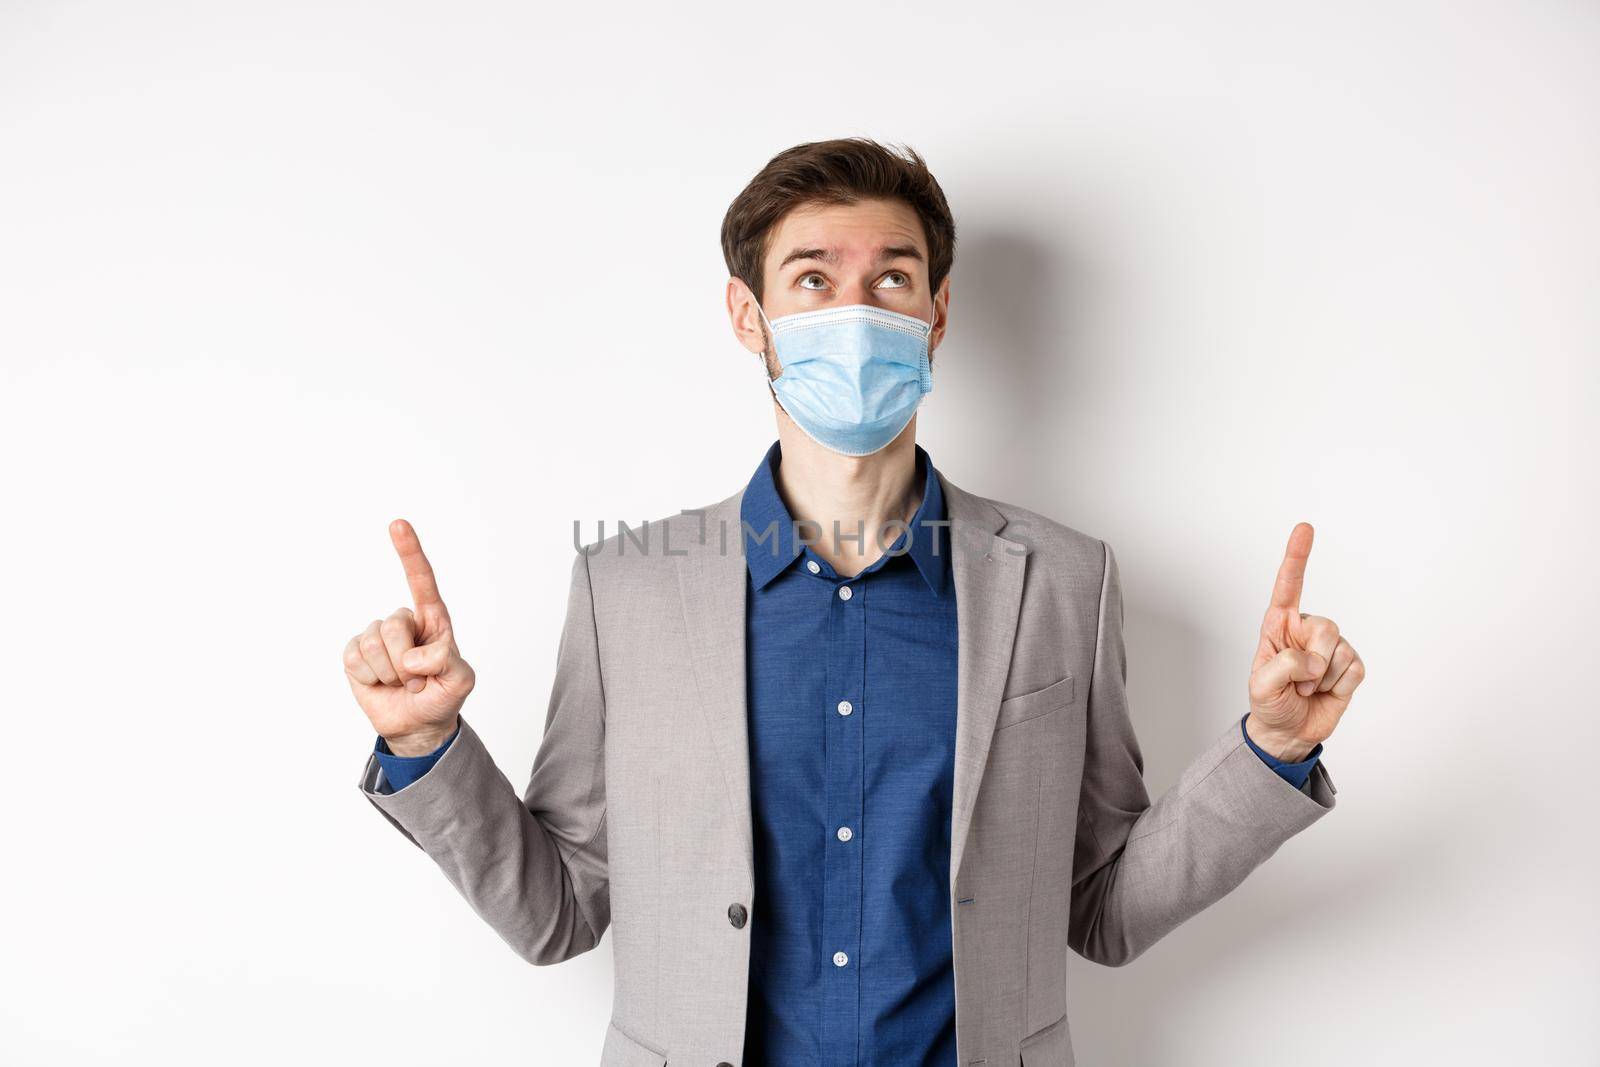 Covid-19, pandemic and business concept. Handsome businessman in medical mask and suit, looking and pointing up with dreamy face, white background.